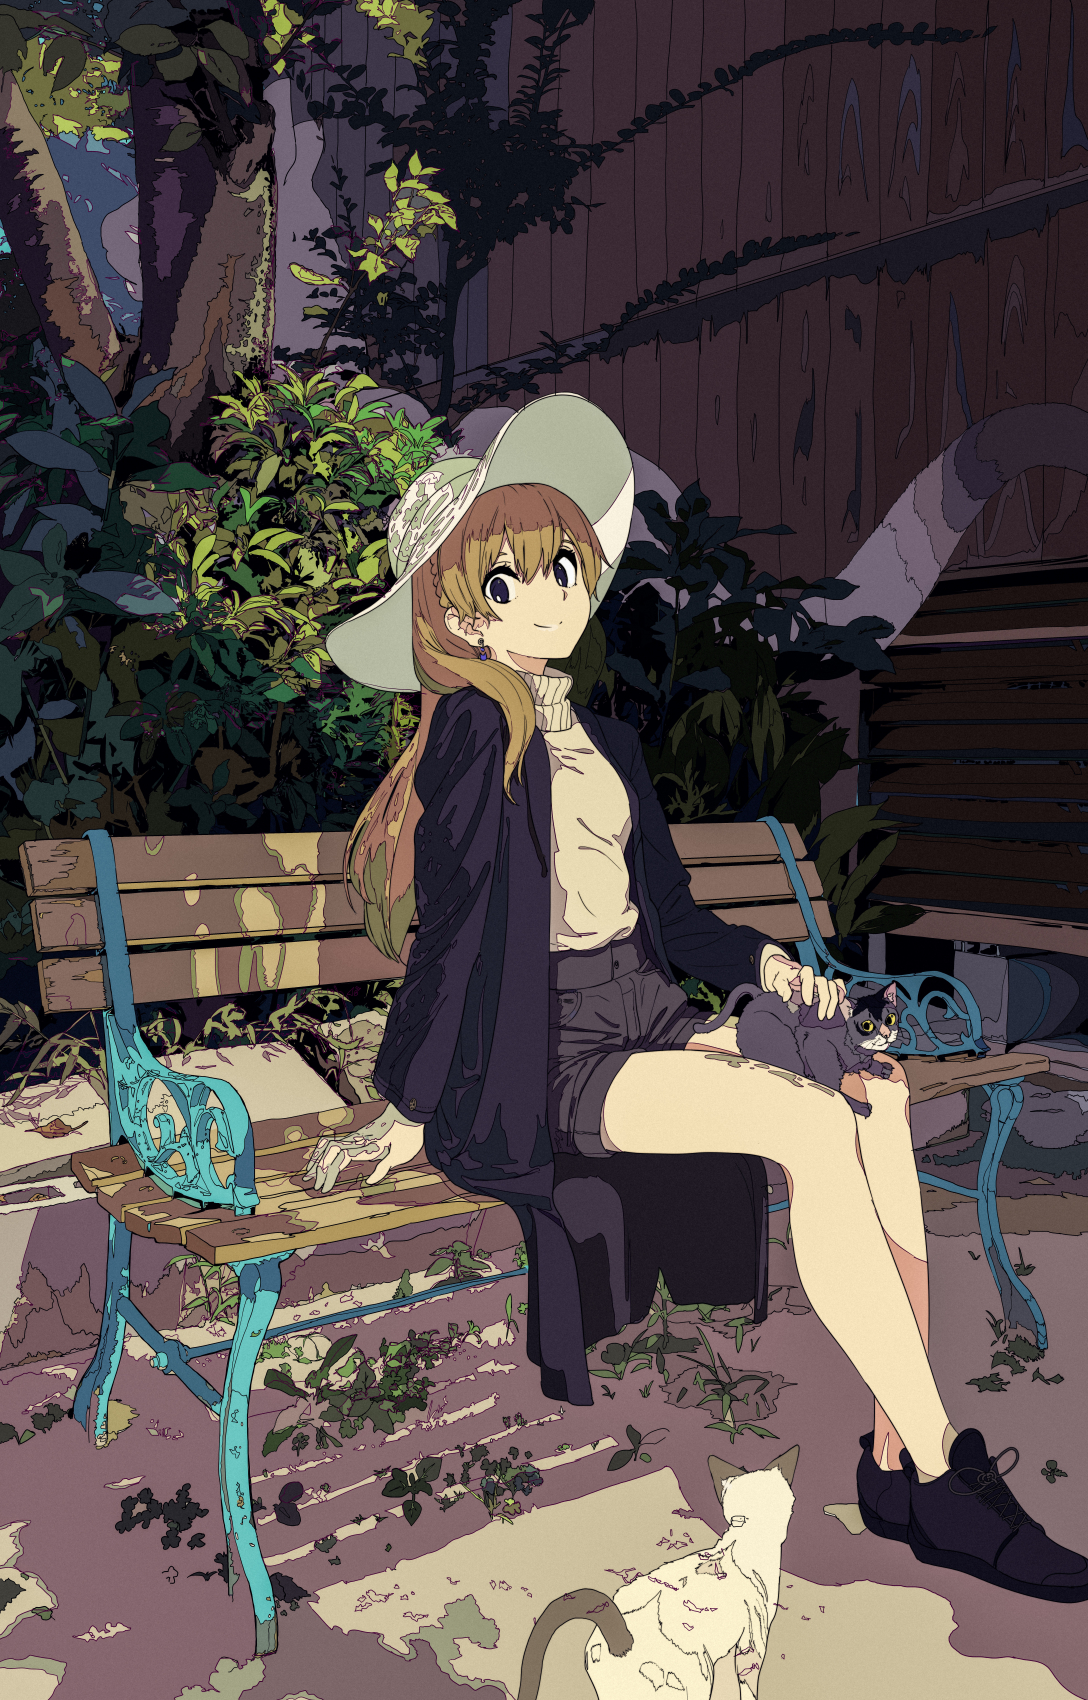 Anime 1088x1700 anime anime girls blonde cats bench dark hair Cogecha sitting portrait display looking at viewer smiling hat women with hats hair between eyes leaves animals trench coat long hair turtlenecks